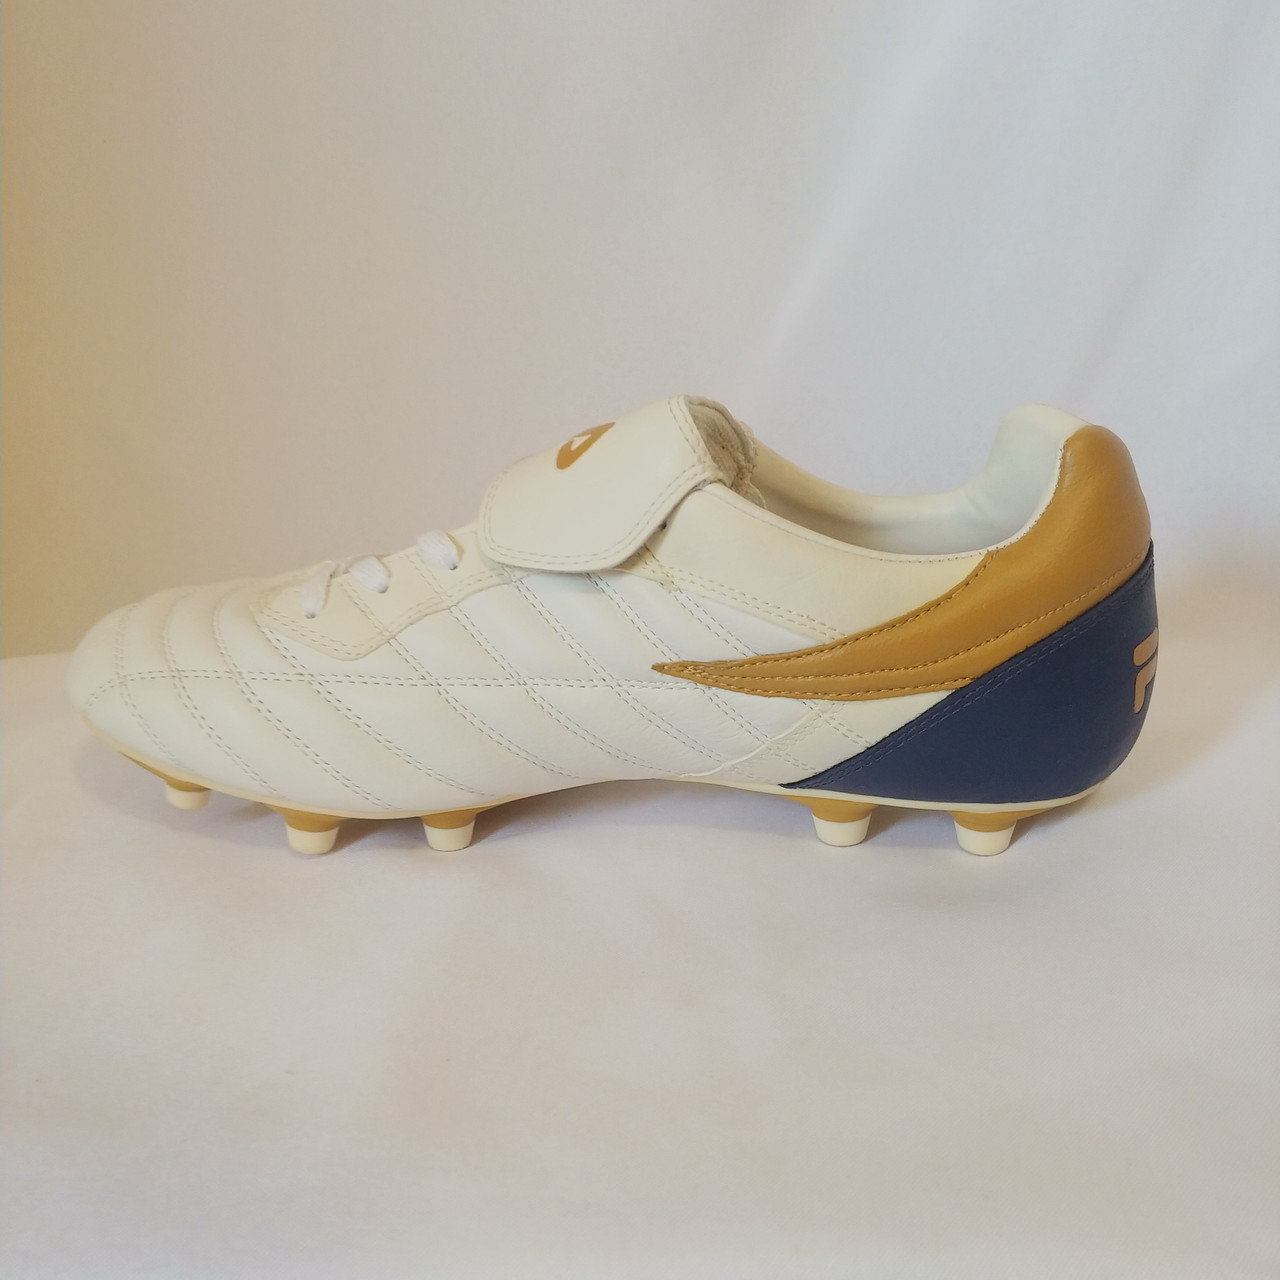 Fila Mens MAXIMO LEATHER/SYN Soccer Cleats White/Gold/Navy - Coldeportes Corp.